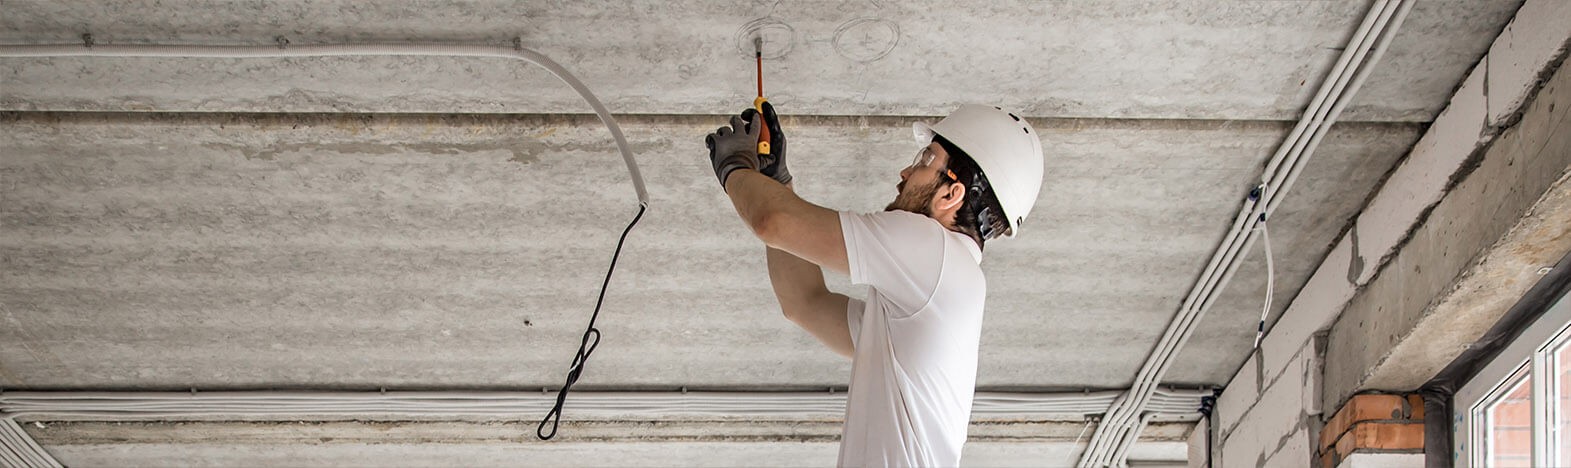 Lakeland Electrician, Electrical Contractor and Commercial Electrician